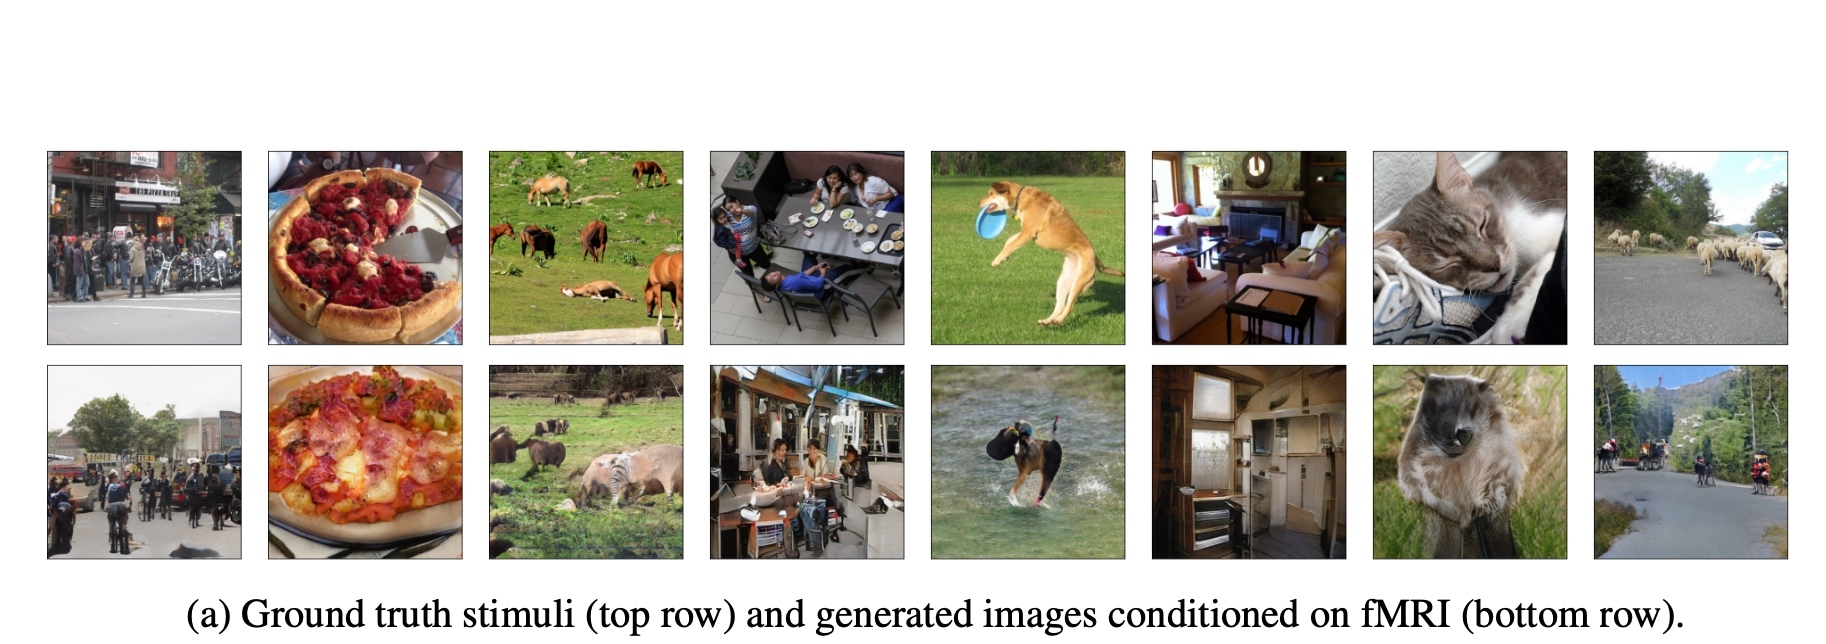 complex "ground truth" images and the resulting AI reconstructions